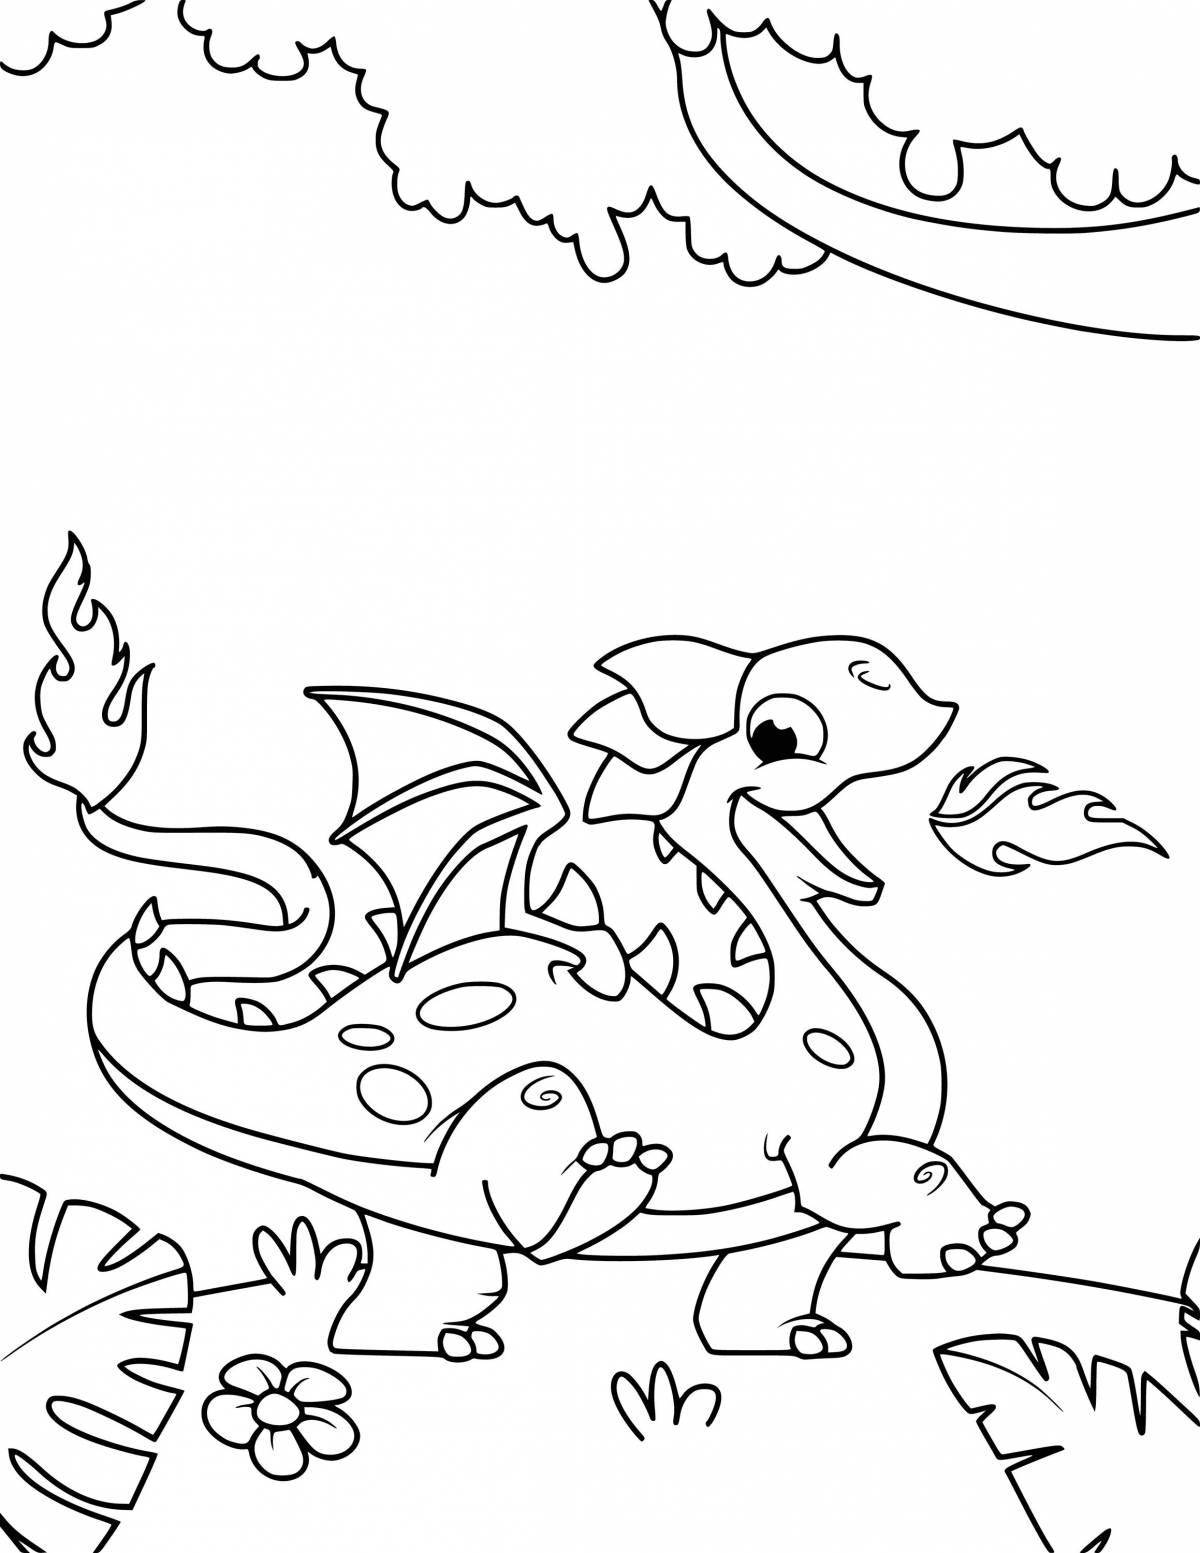 Adorable dragon coloring book for kids